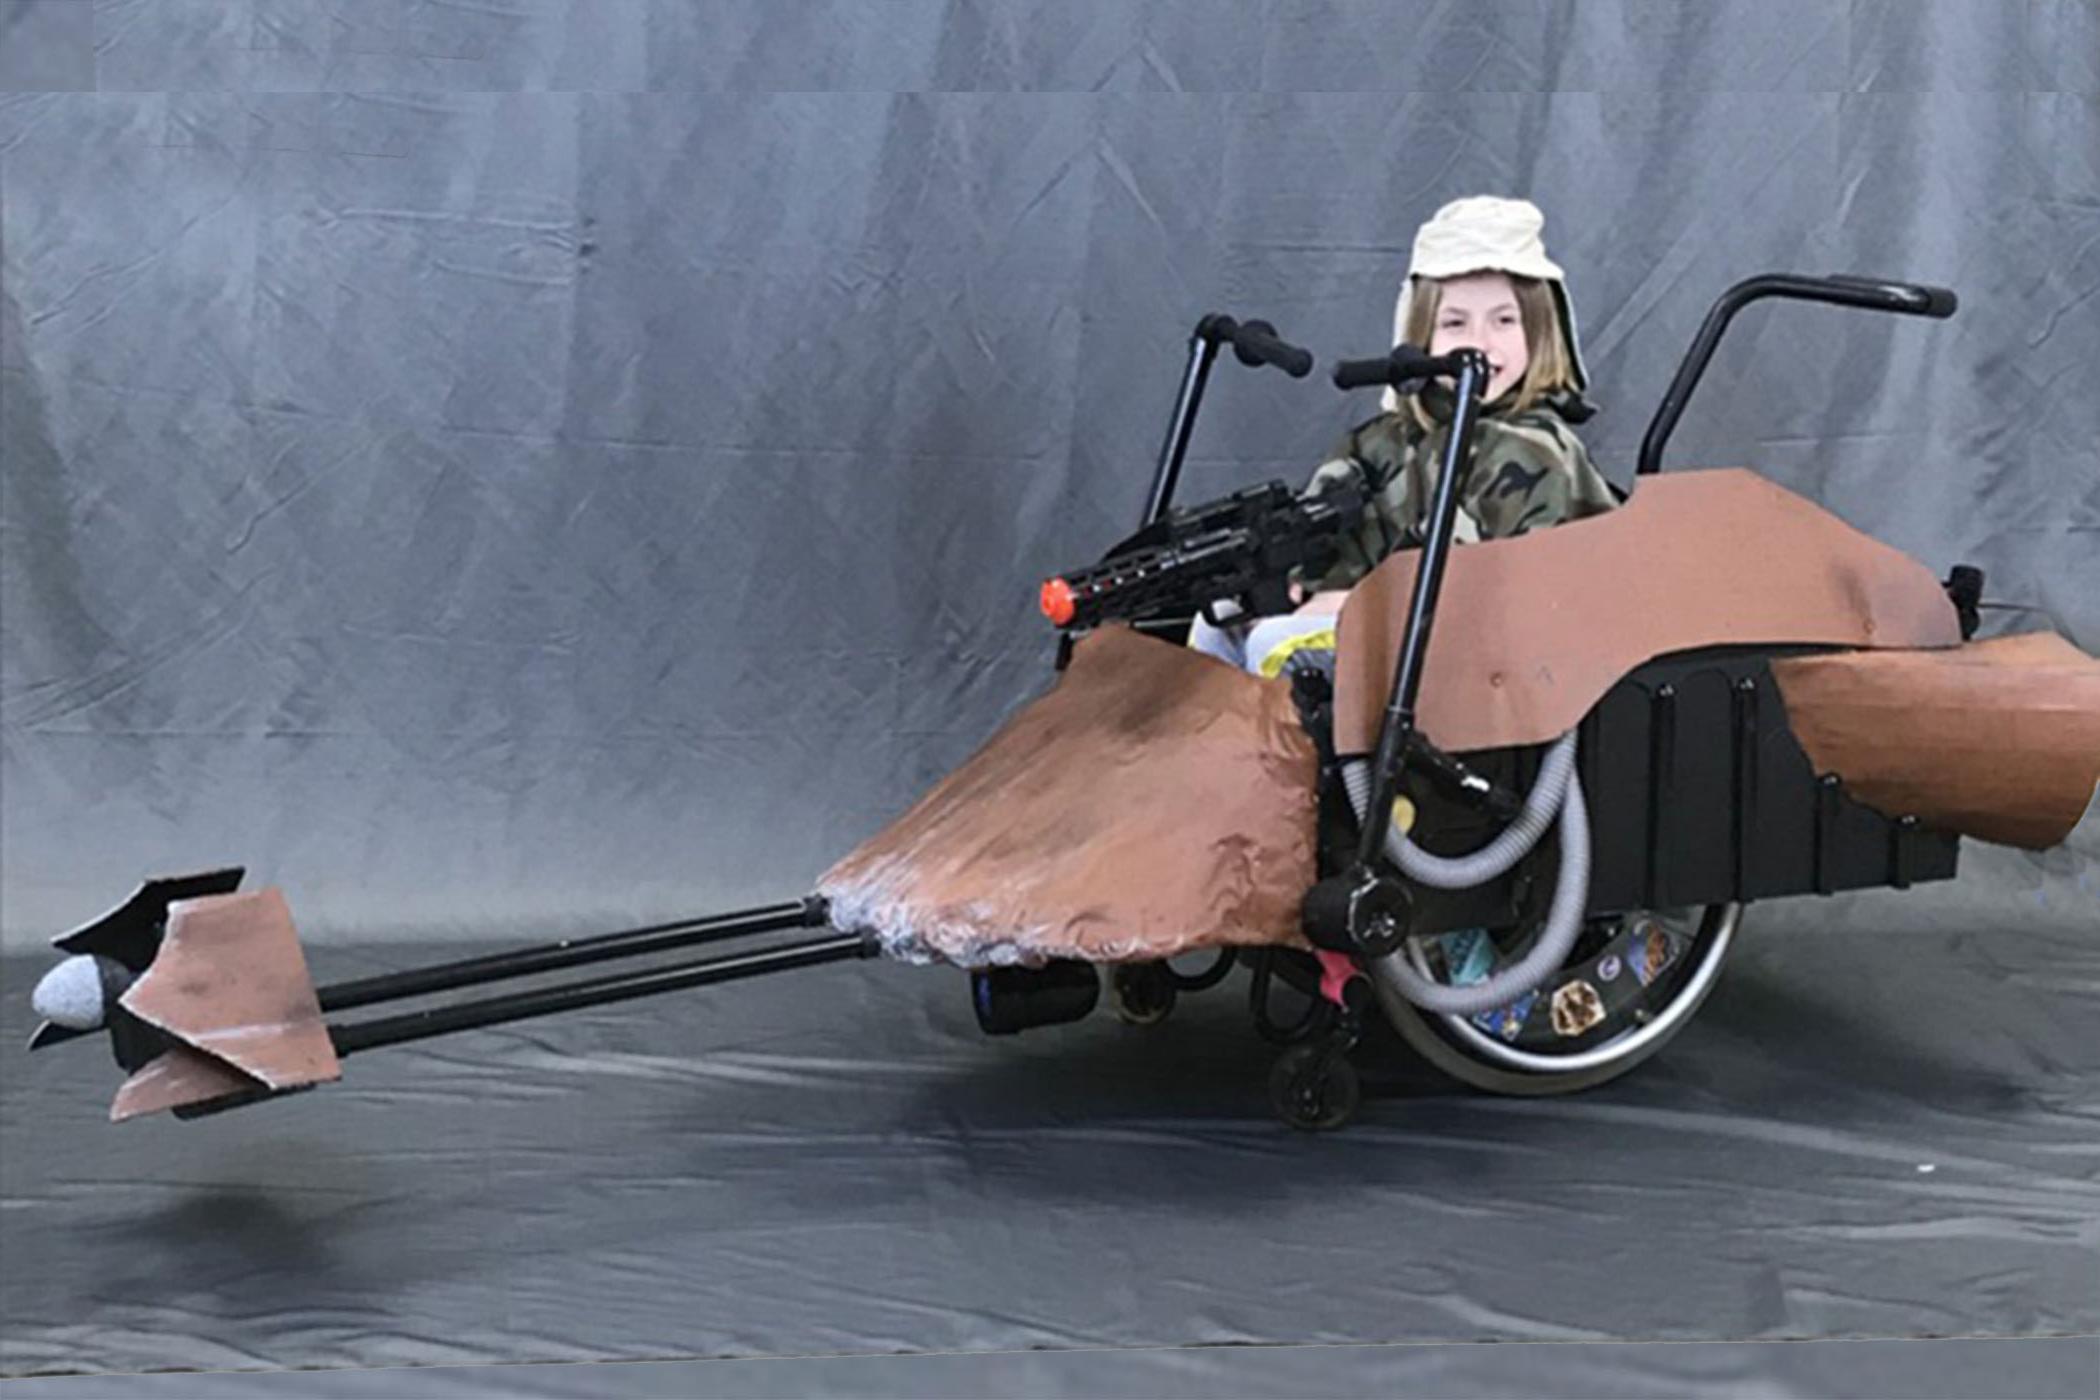 This young Princess Leia was thrilled with her Endor speeder bike wheelchair Halloween costume custom-built by Randolph College SPS.